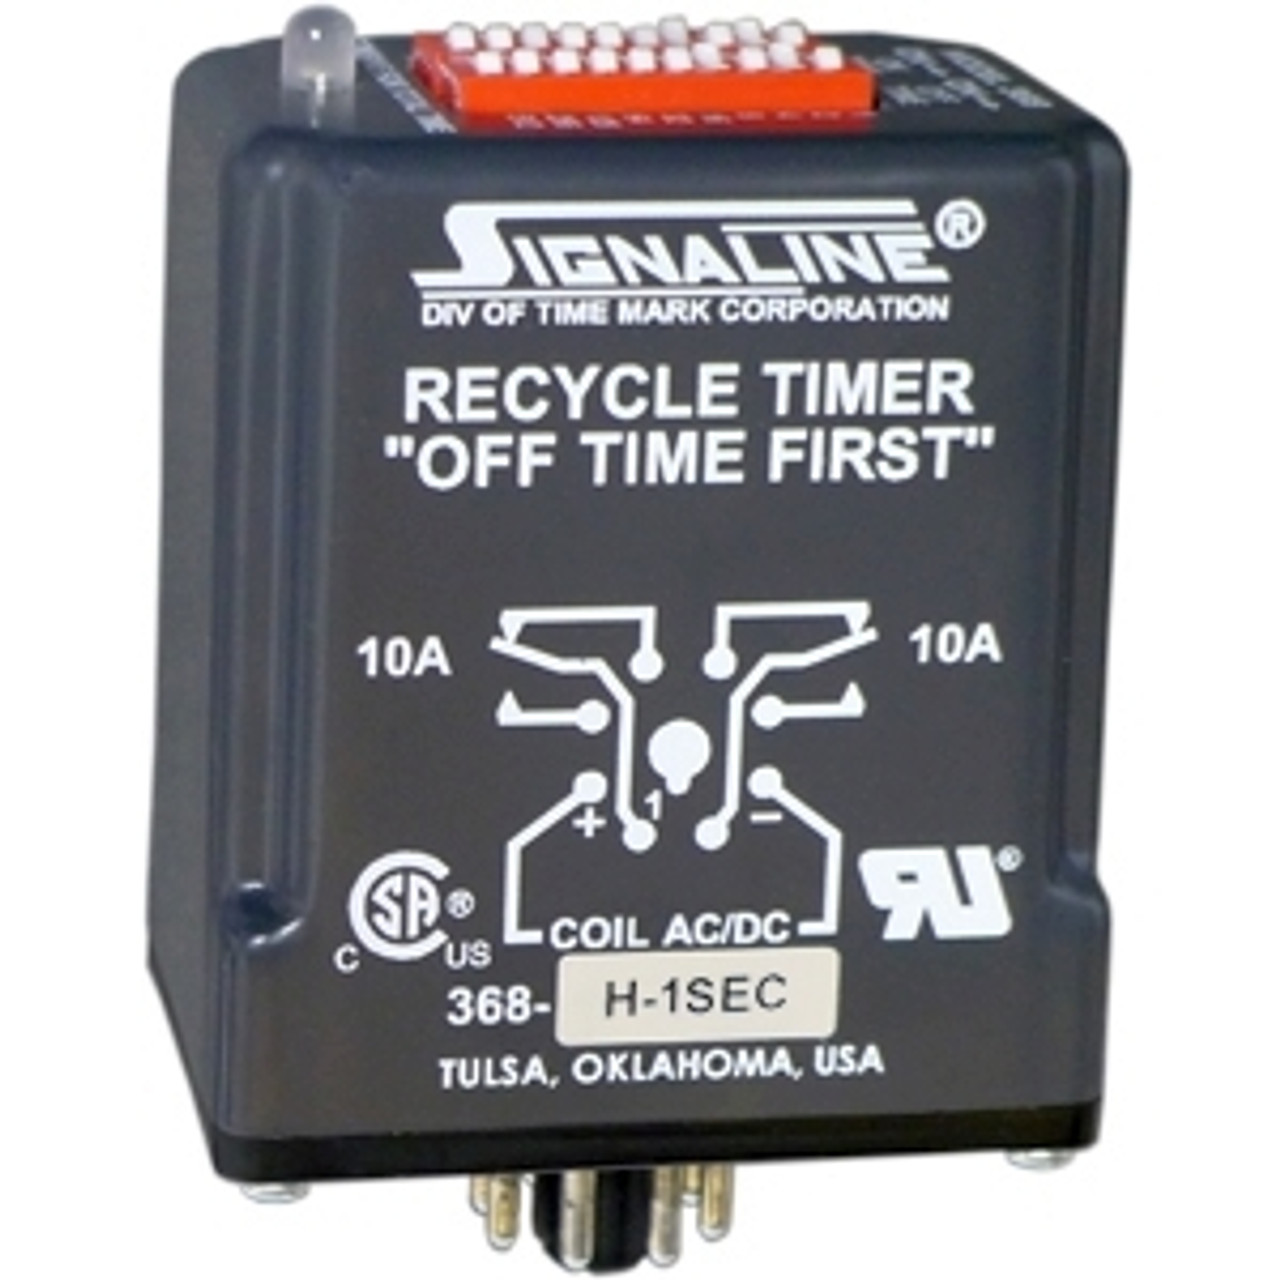 TimeMark 368-L-1SEC/SG Repeat Cycle - Recycle